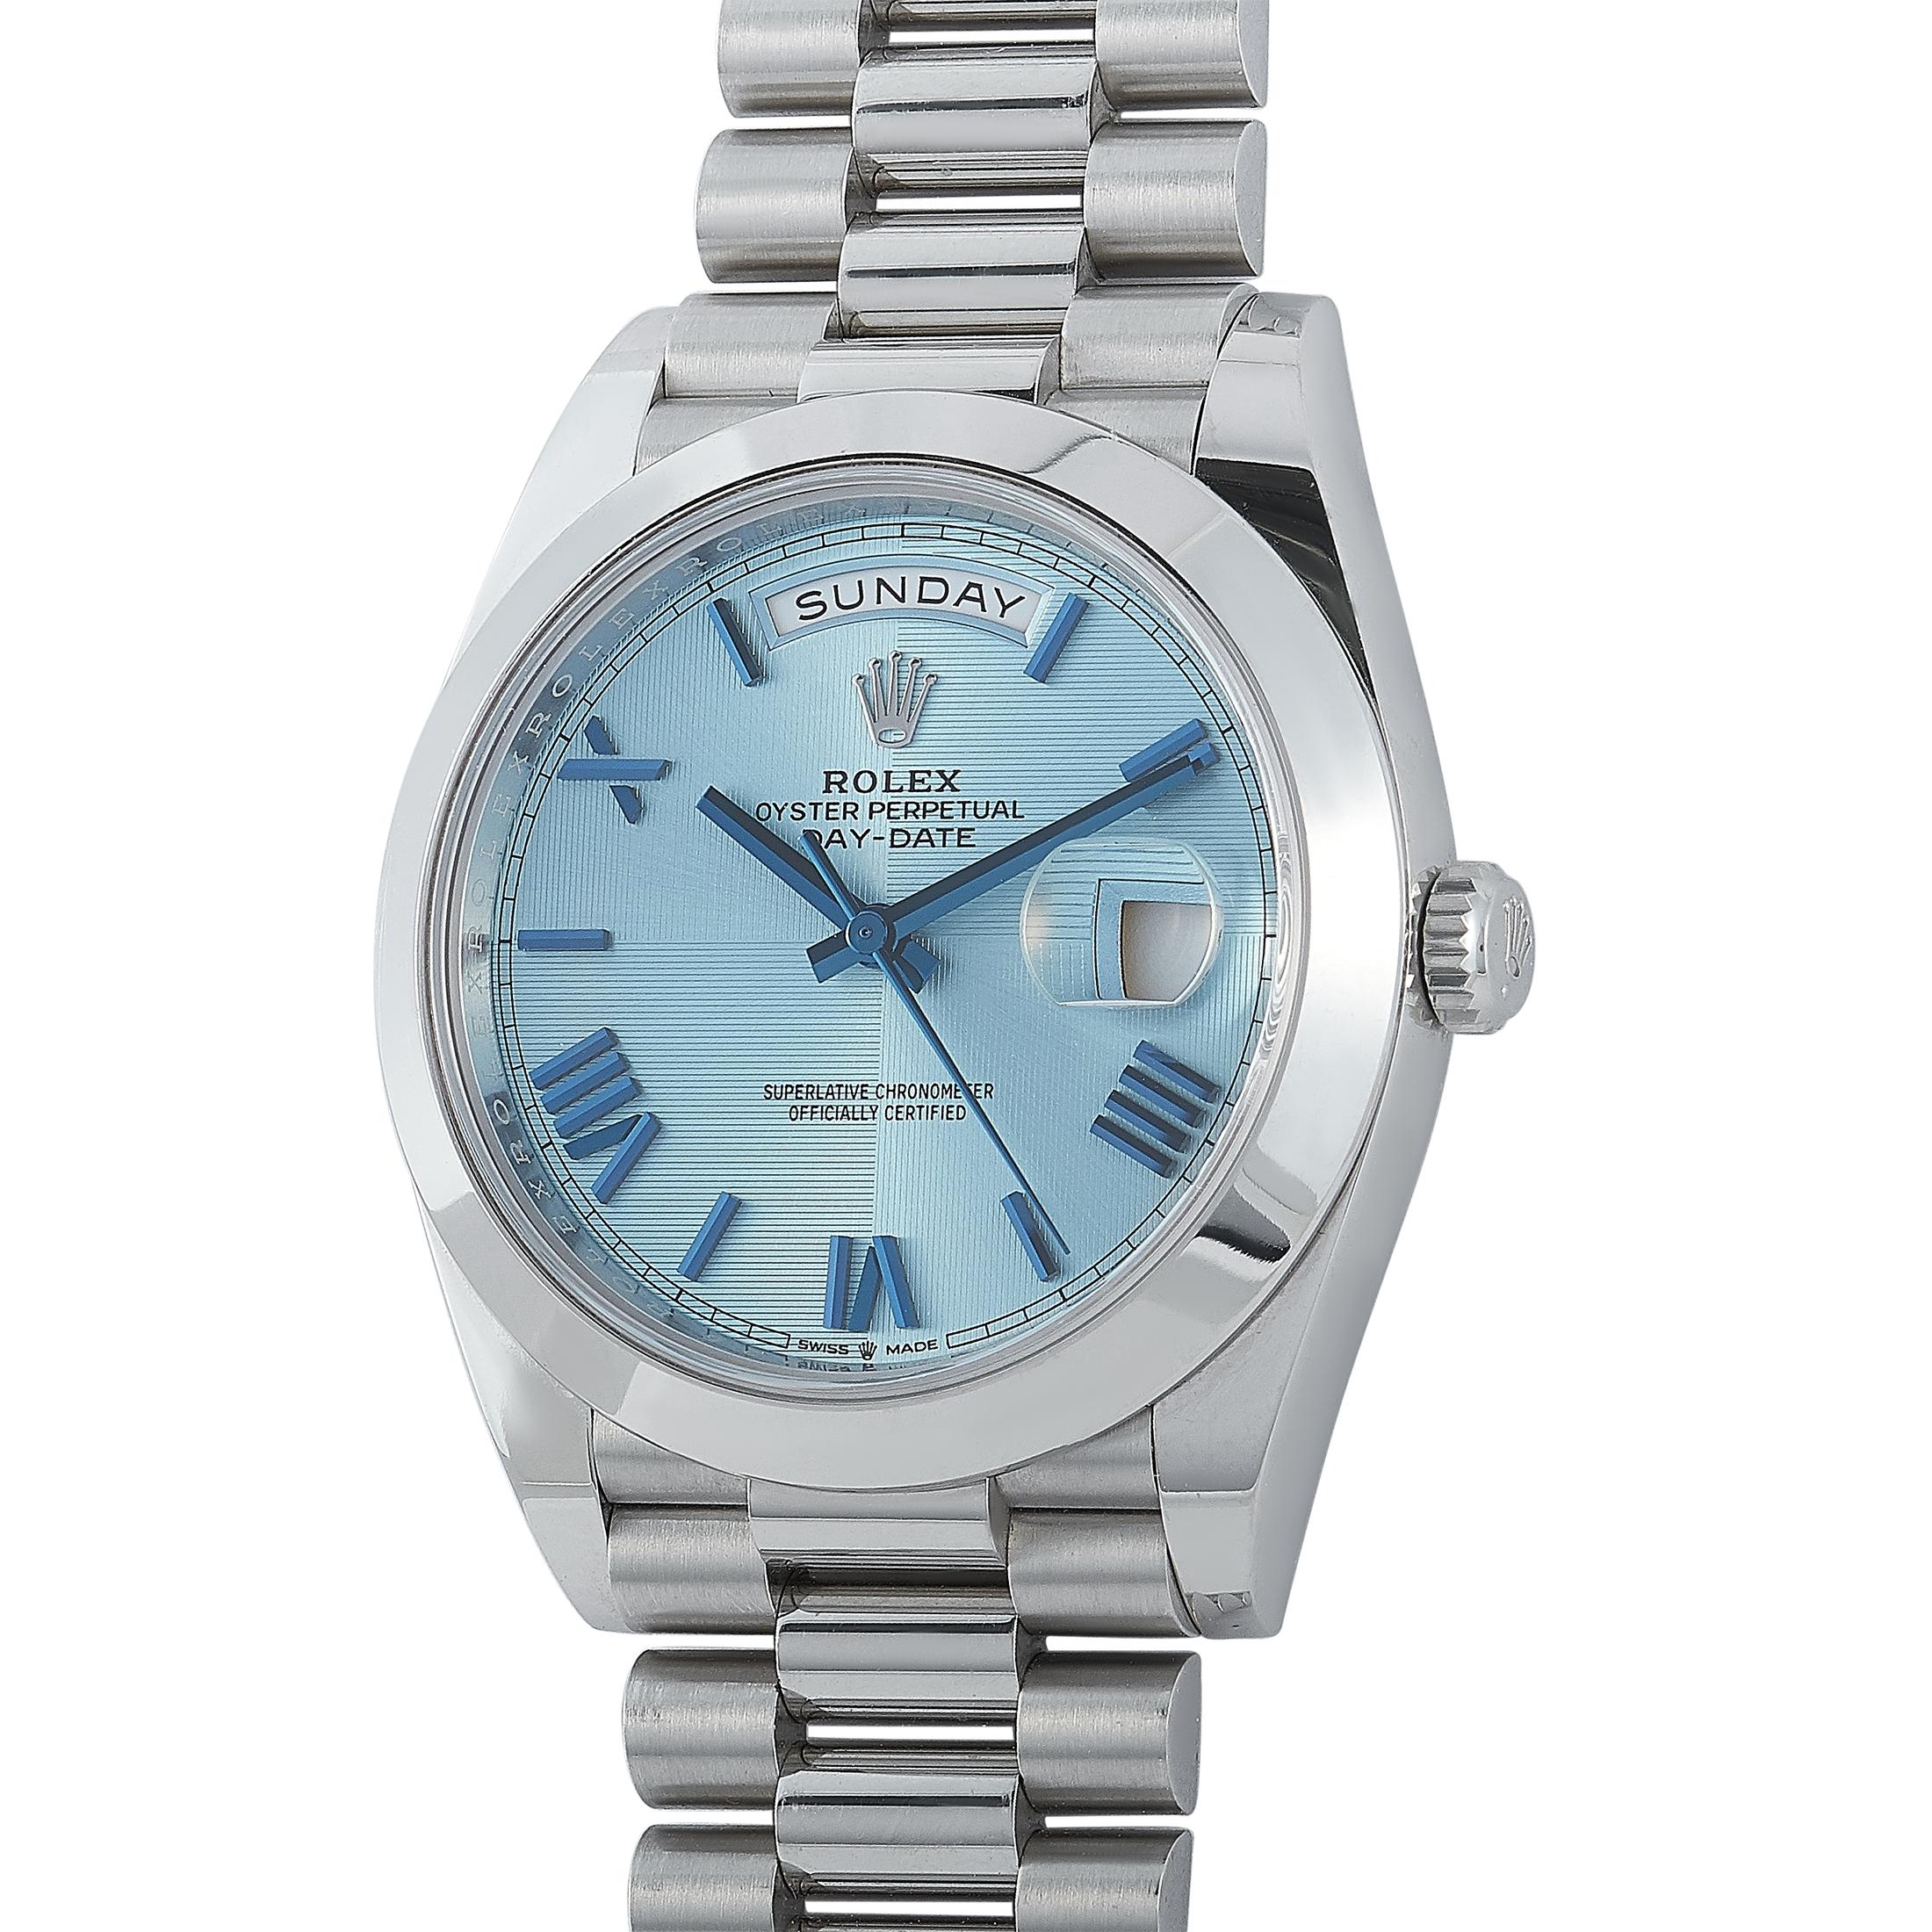 The Rolex Day-Date 40, reference number 228206-0001, is a member of the prestigious “Day-Date” collection.

The watch boasts a 40 mm platinum case fitted with a smooth platinum bezel. The case is mounted onto a platinum President bracelet, secured